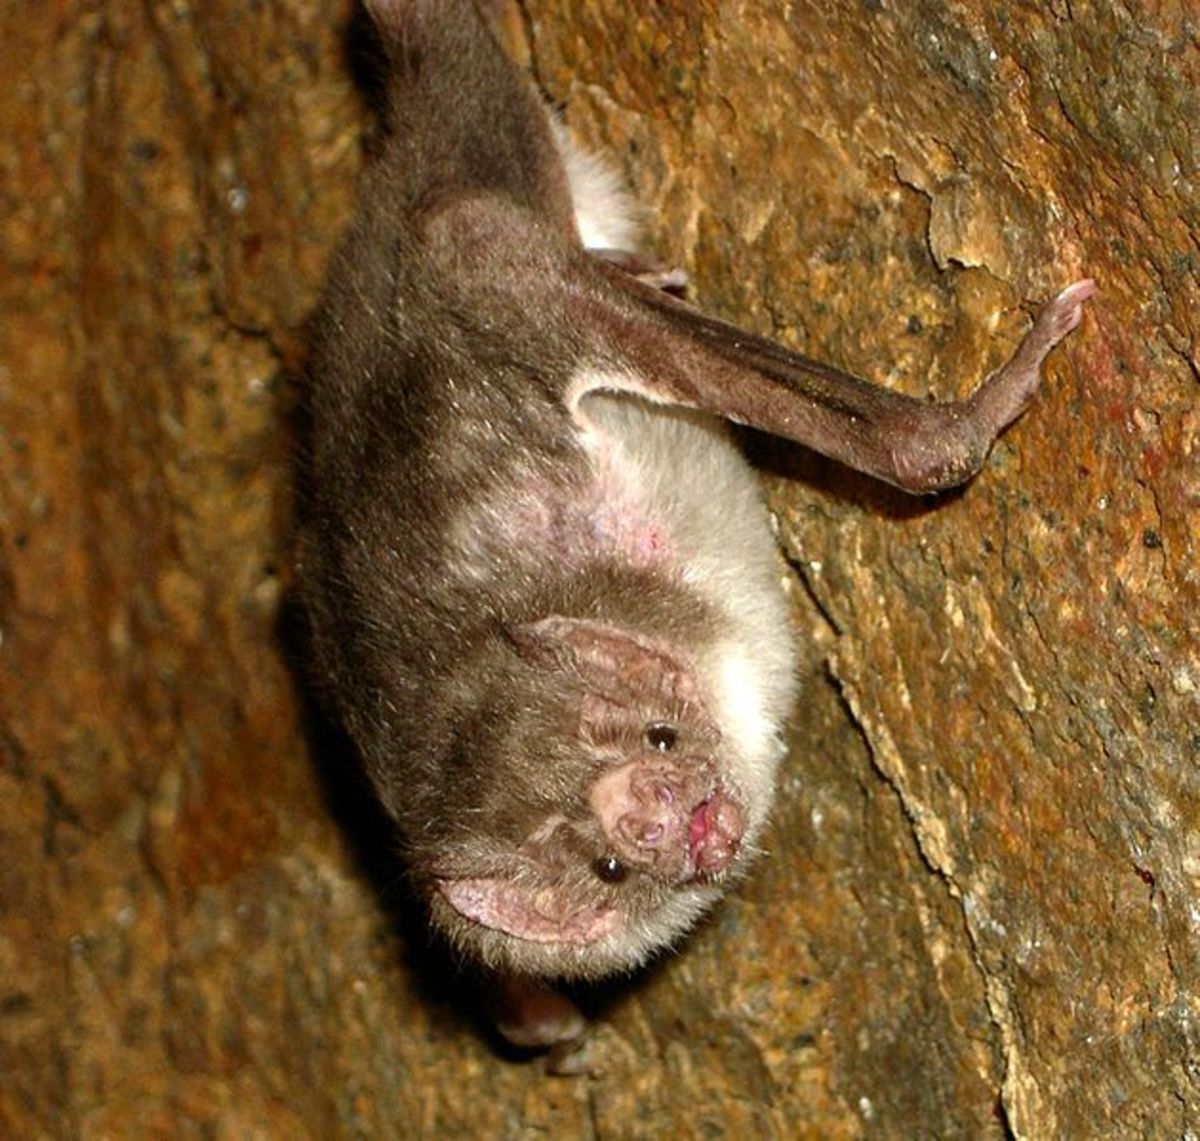 Vampire bats are feared as blood thirsty demons of the night.